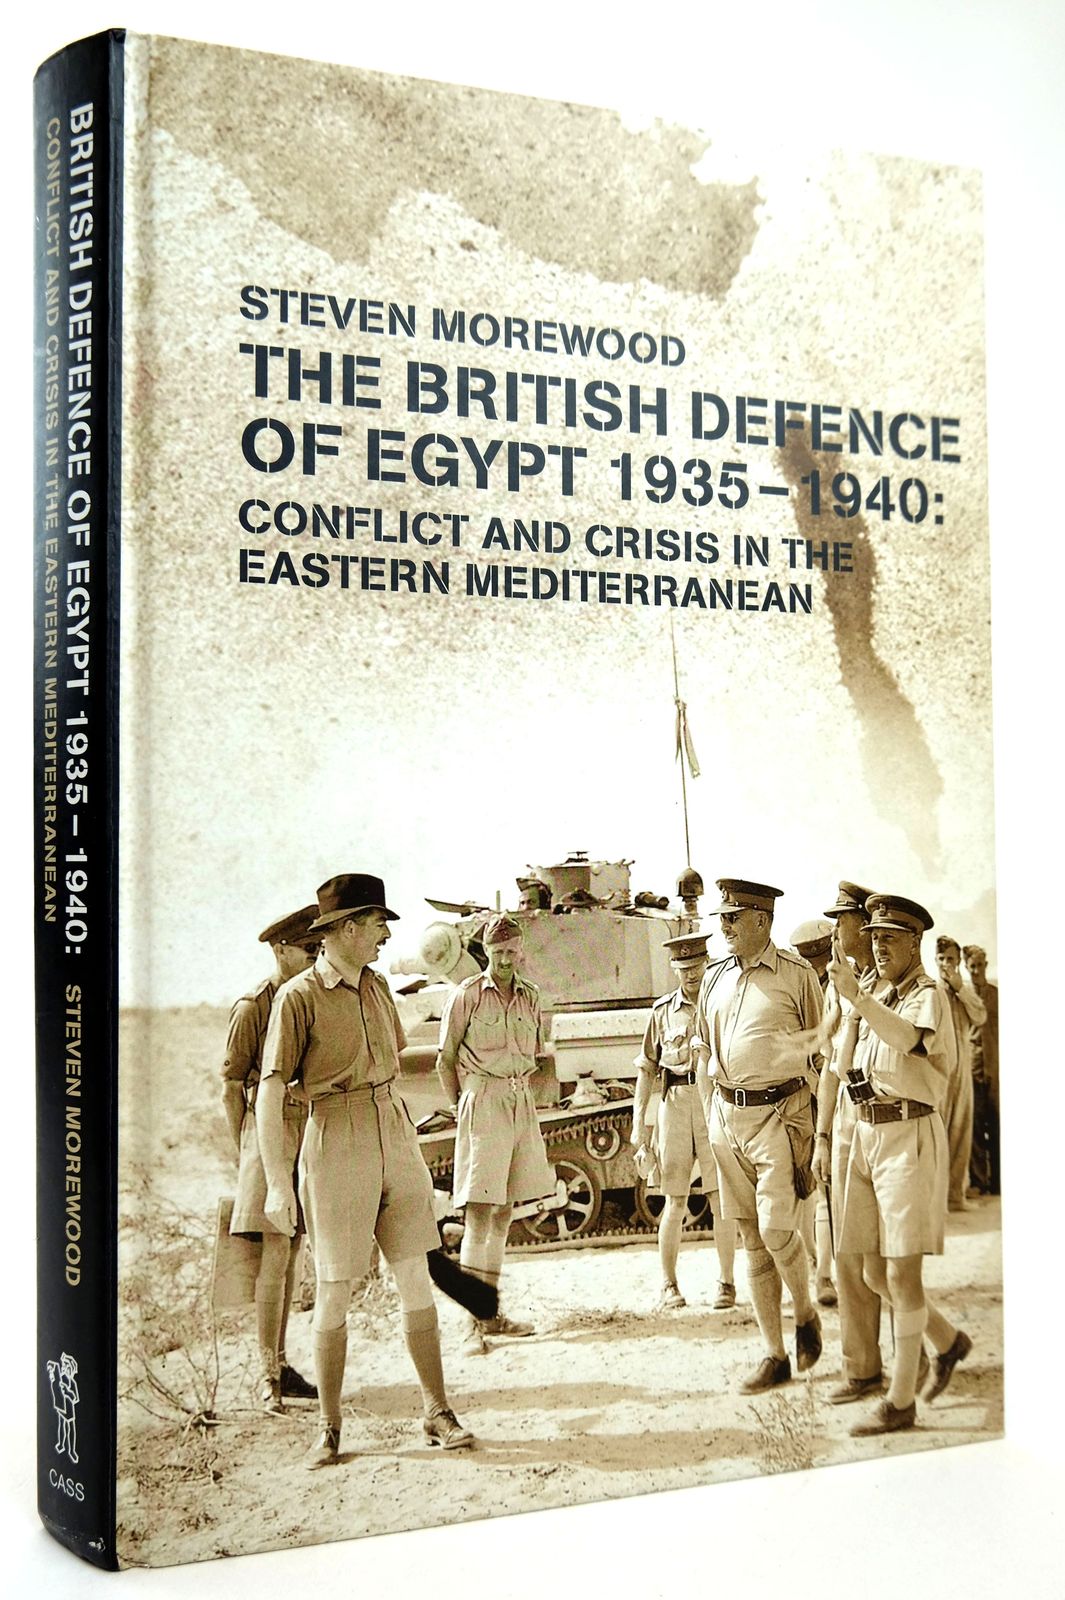 Photo of THE BRITISH DEFENCE OF EGYPT 1935-1940: CONFLICT AND CRISIS IN THE EASTERN MEDITERRANEAN- Stock Number: 1818768